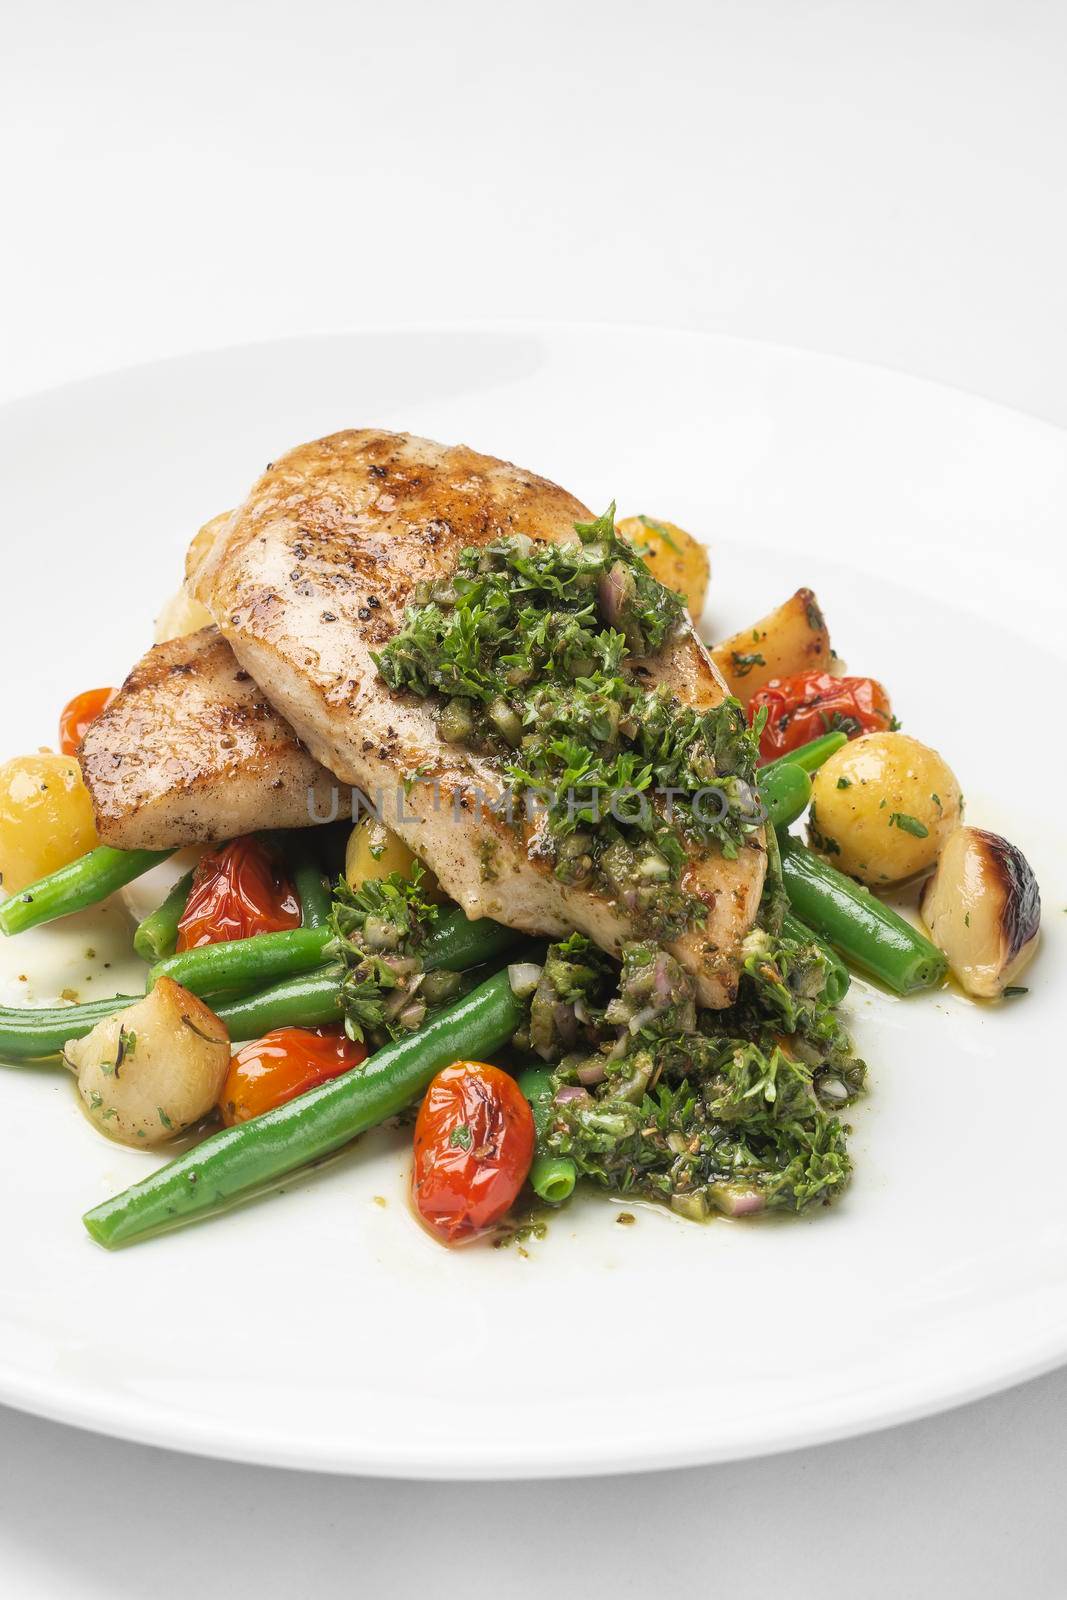 grilled chicken breast with argentina chimichurri sauce and vegetables meal by jackmalipan